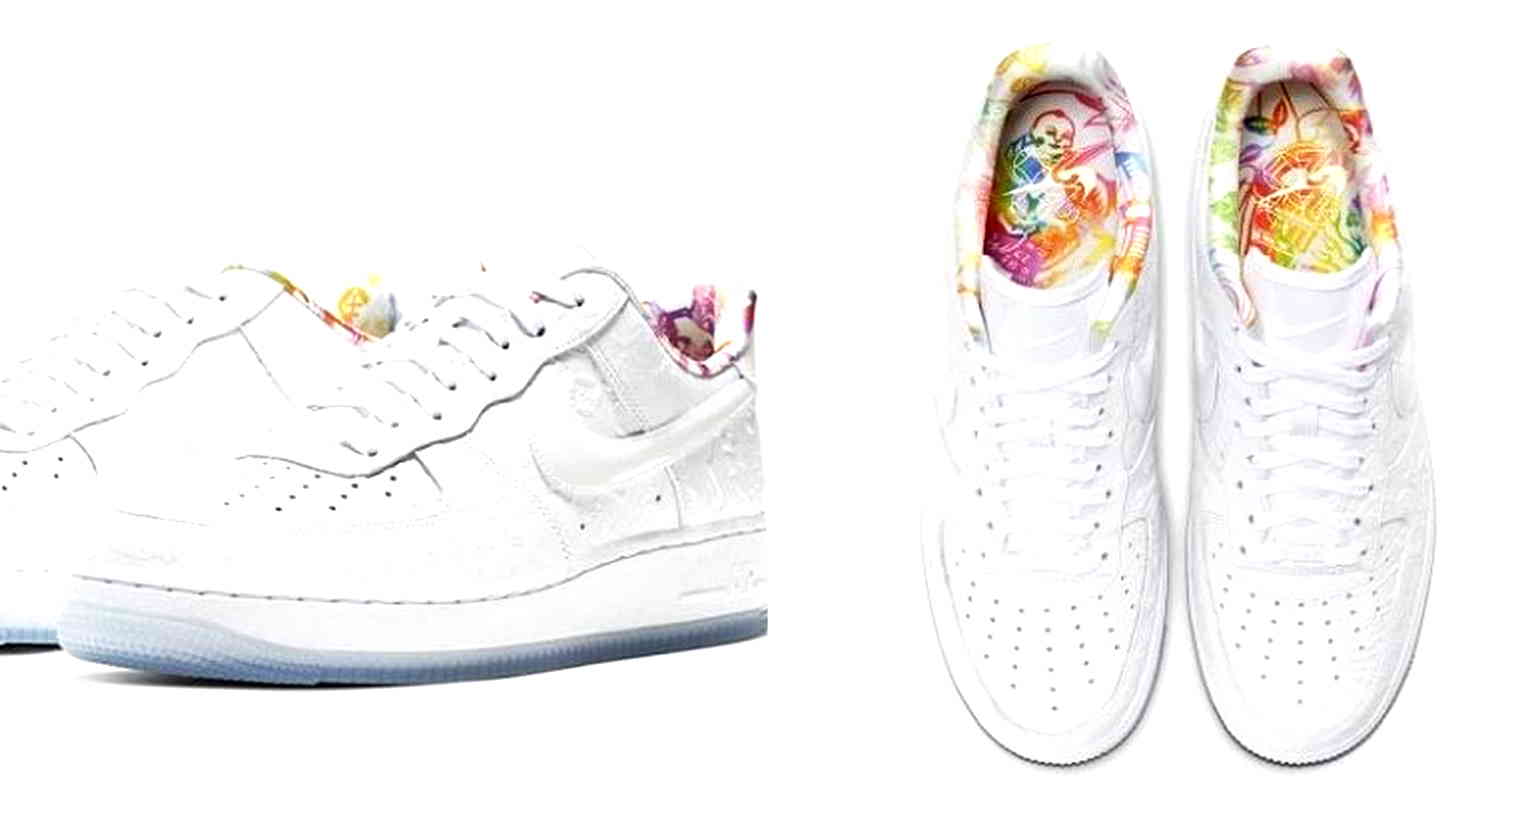 Nike is Releasing Special ‘Year of the Rat’ Air Force 1 Lows